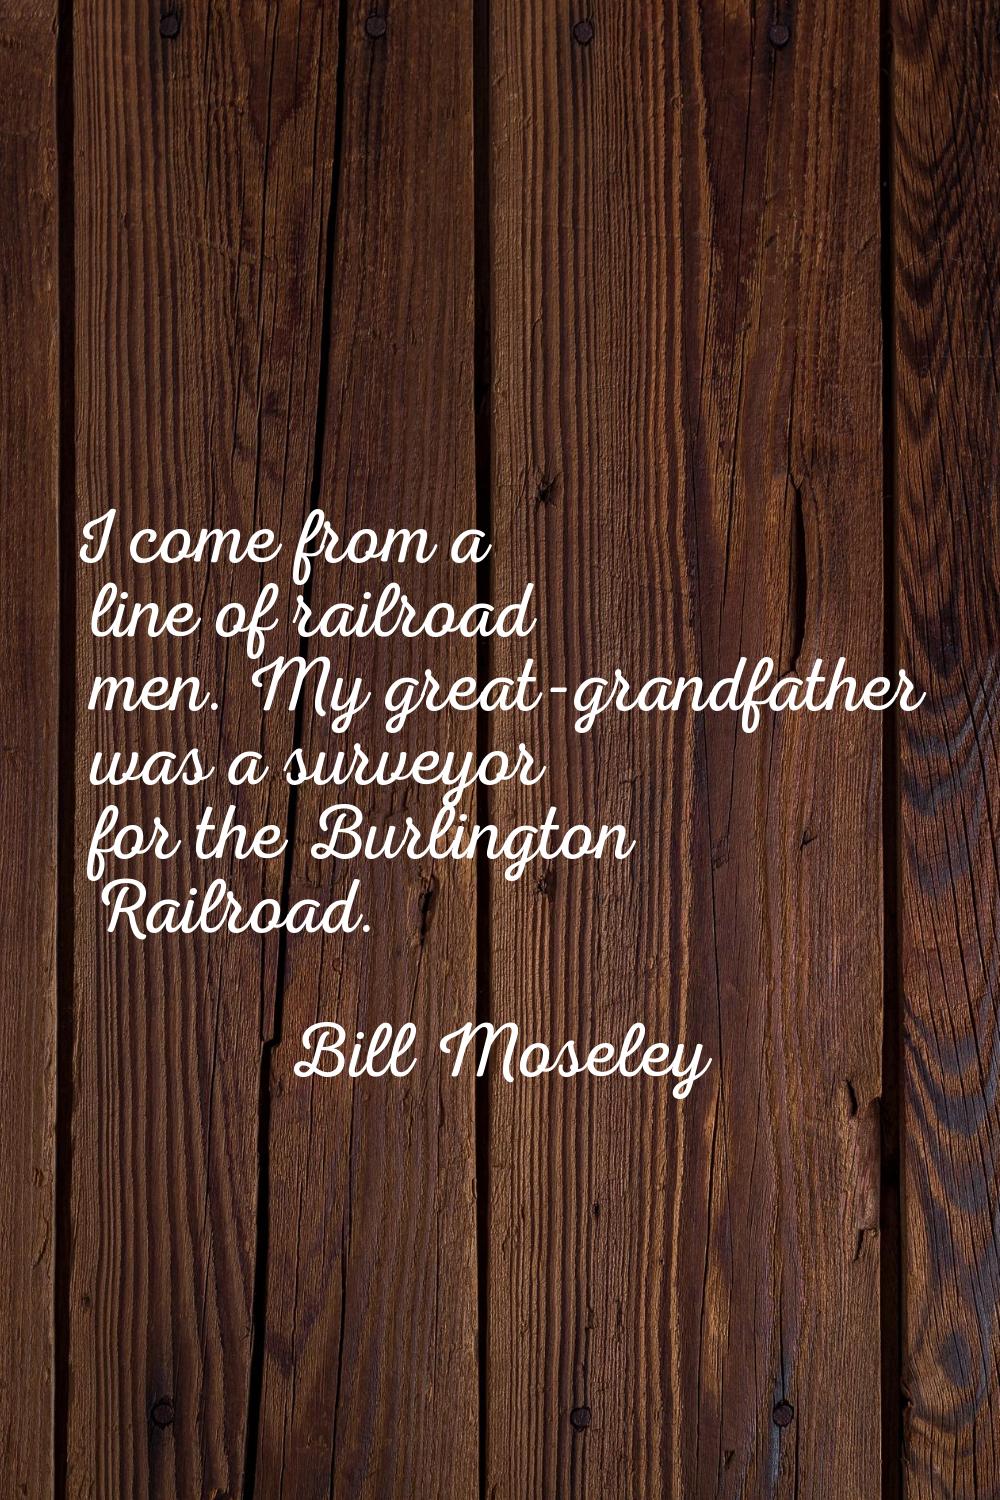 I come from a line of railroad men. My great-grandfather was a surveyor for the Burlington Railroad